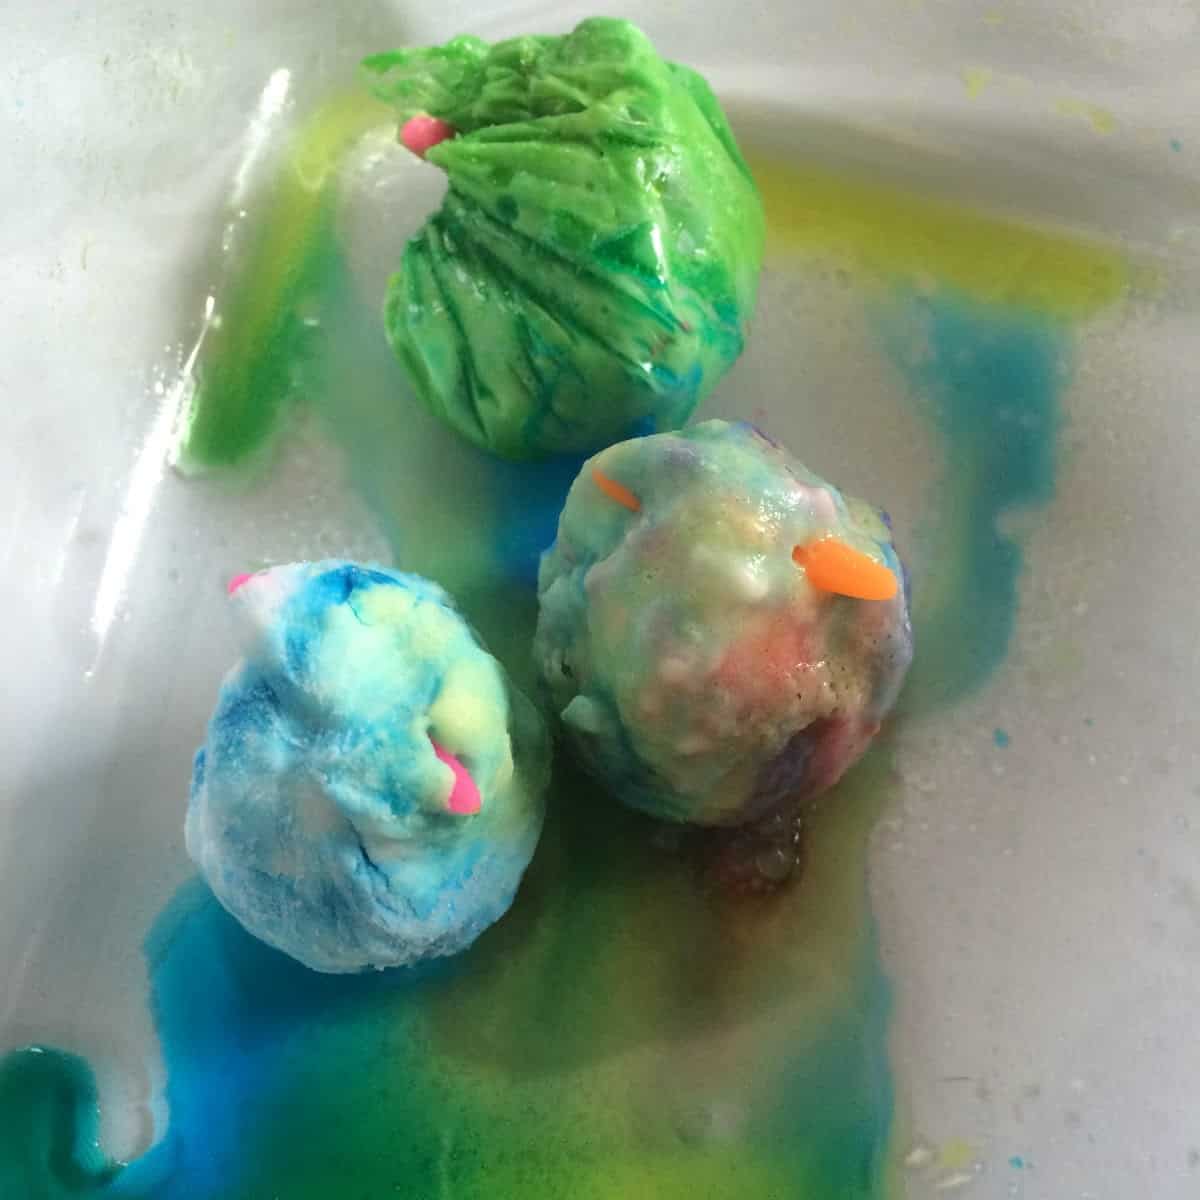 Make some baking soda eggs, hide a surprise inside, and let your kids make them erupt with some vinegar! They will want to make these erupting Easter eggs again and again!